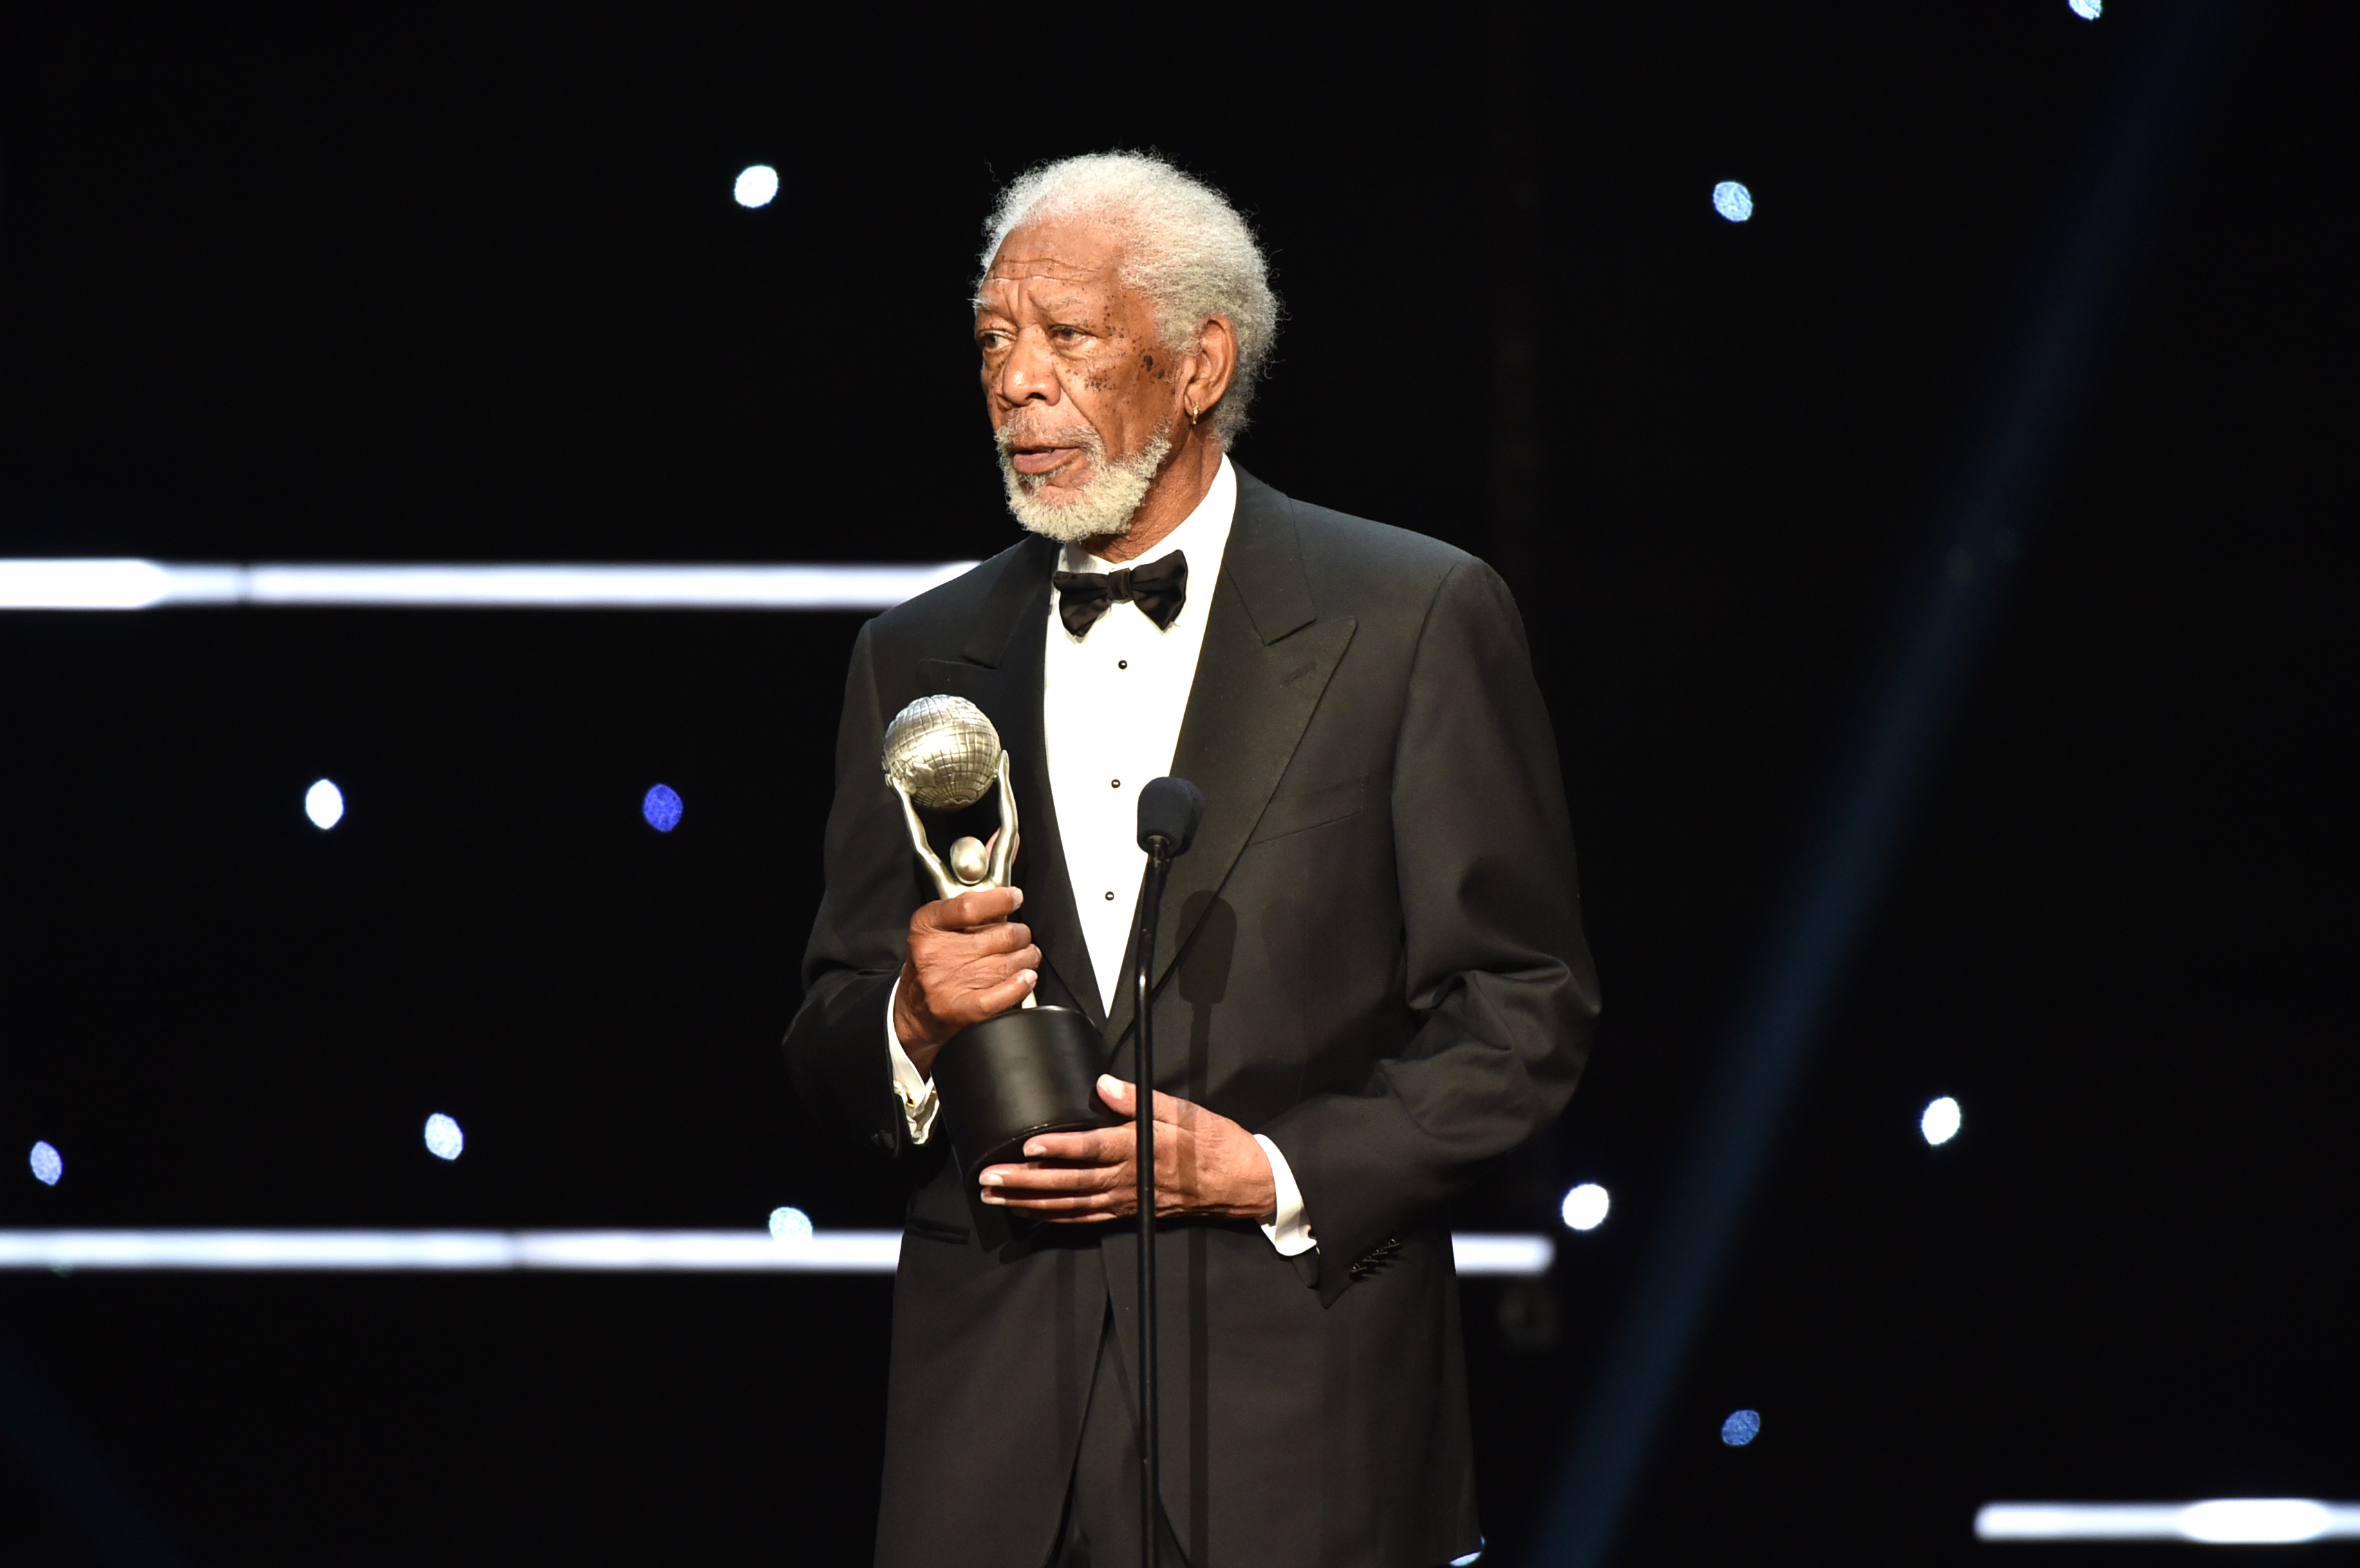 Morgan Freeman at the 51st NAACP Image Awards in Pasadena, California on February 22, 2020 | Source: Getty Images